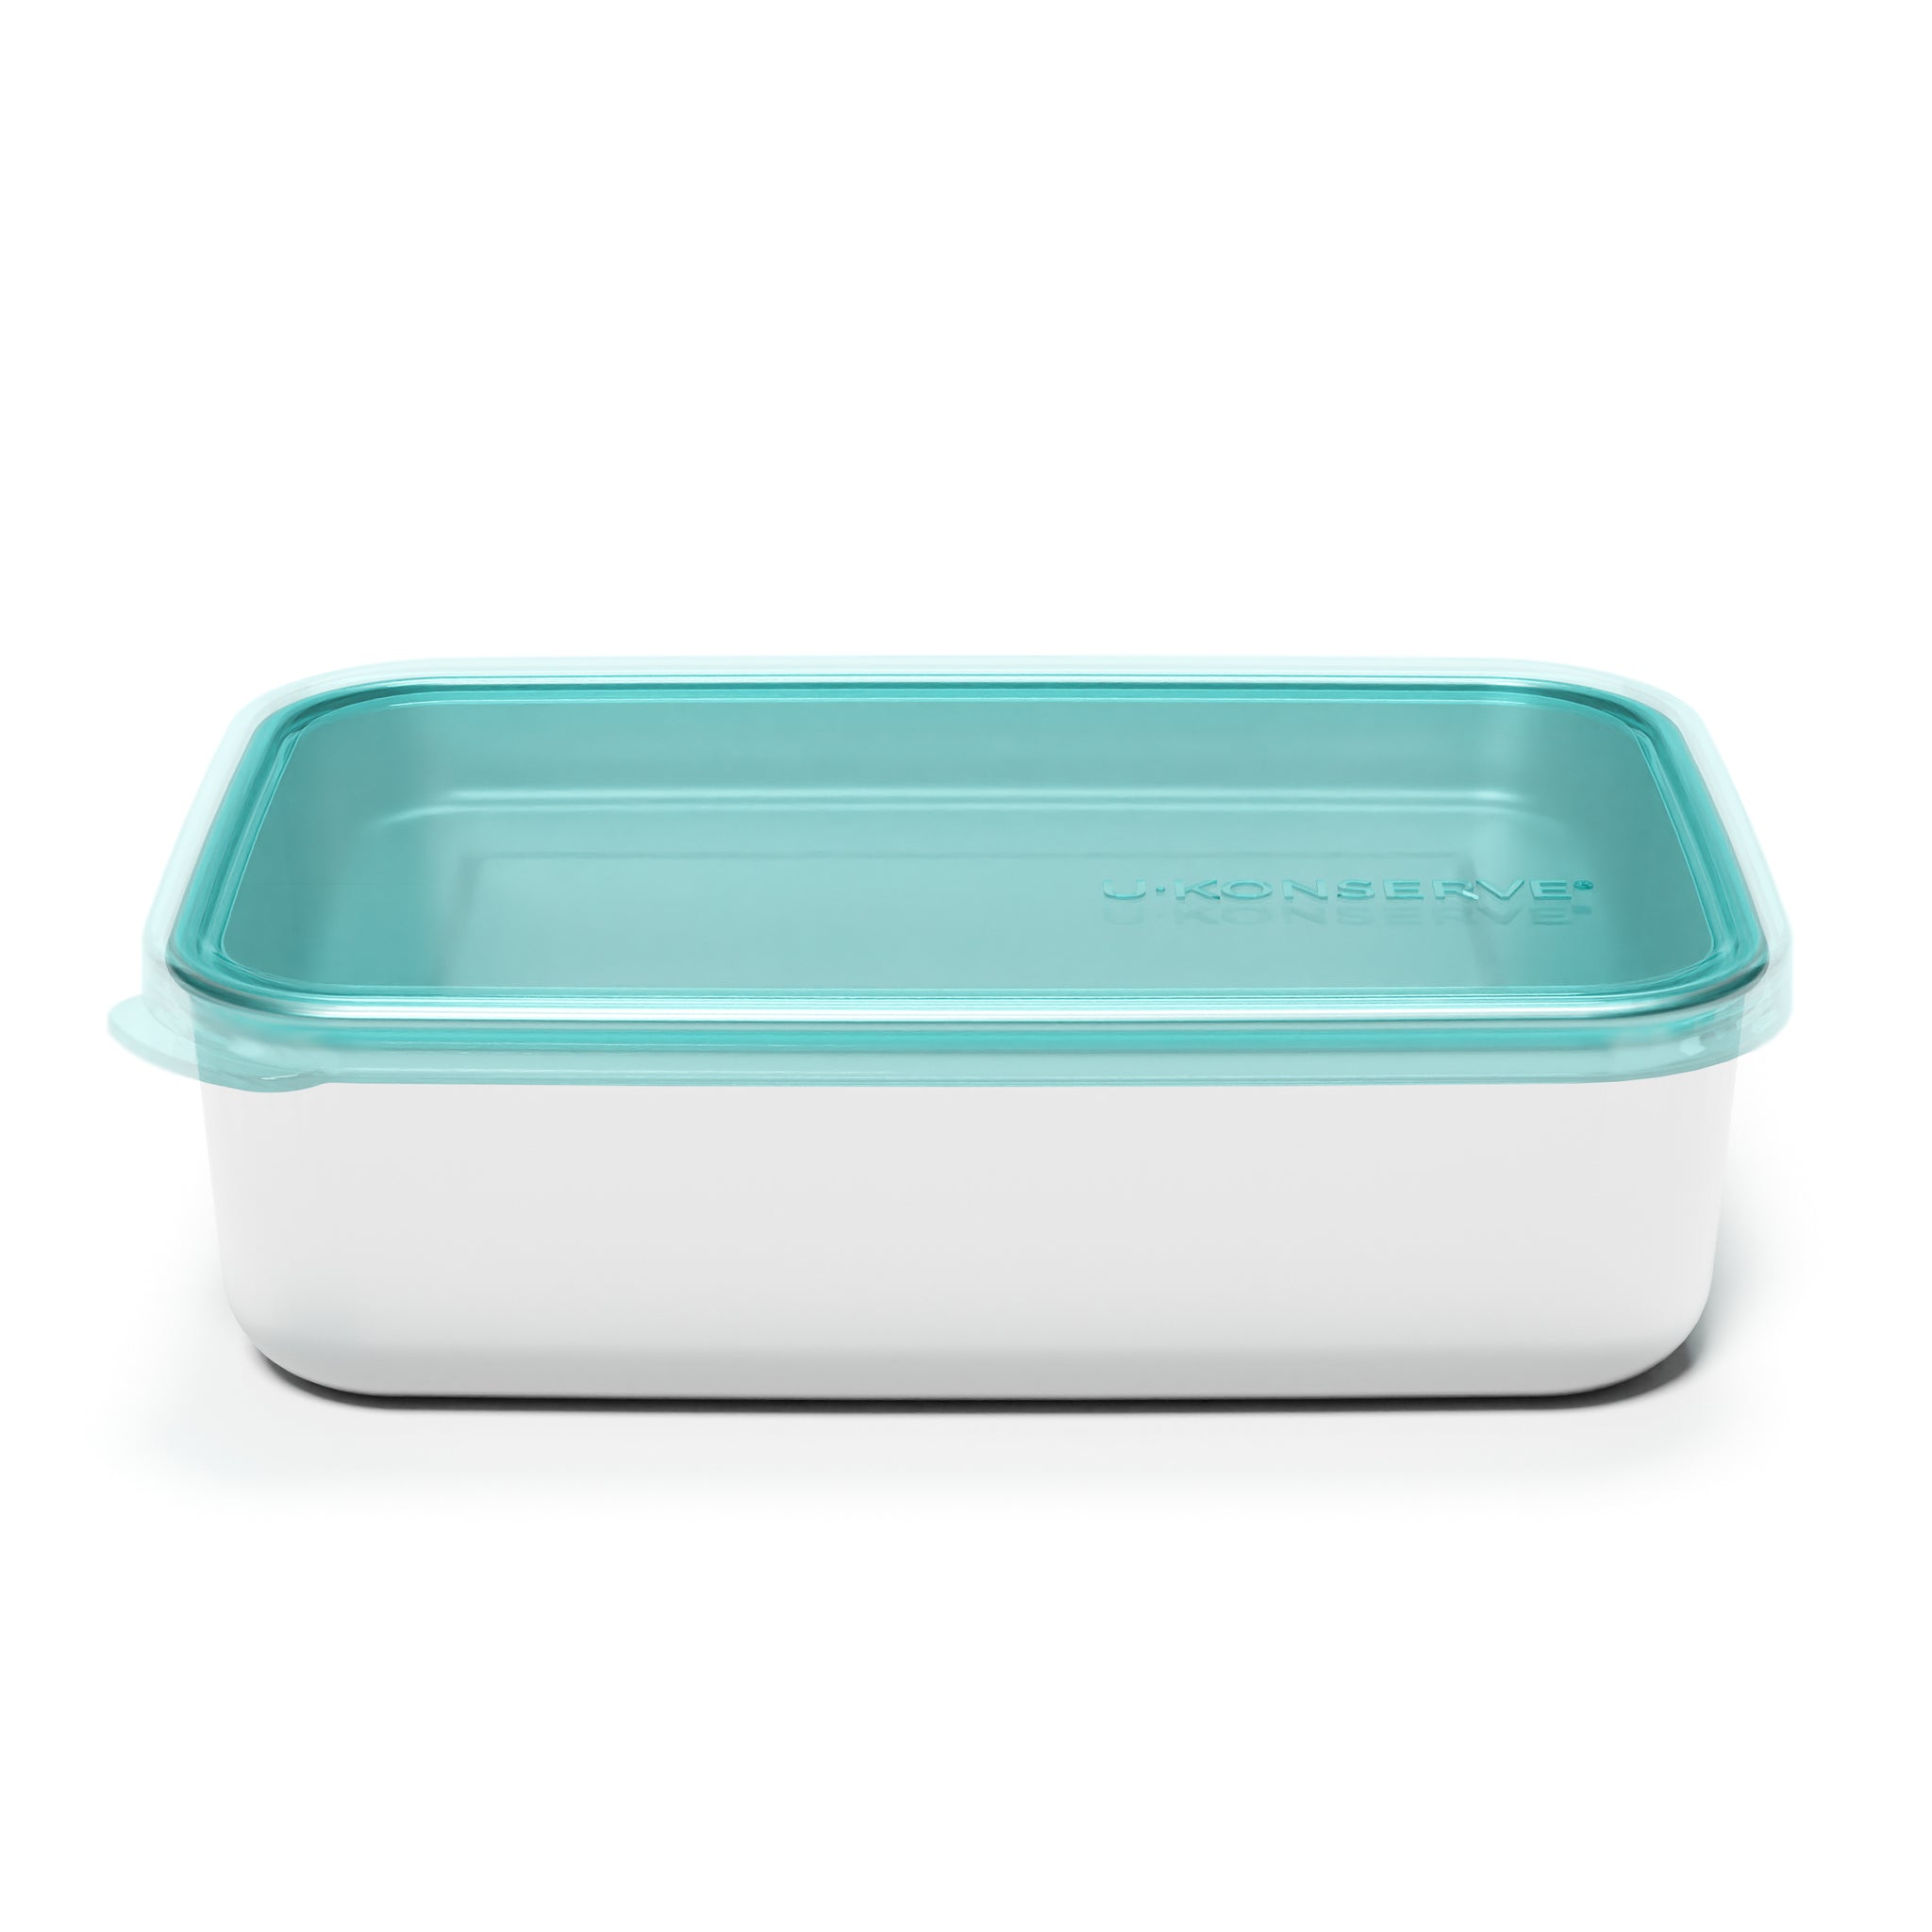 Pyrex 3-Cup Single Rectangular Glass Food Storage Container with Lid, Green